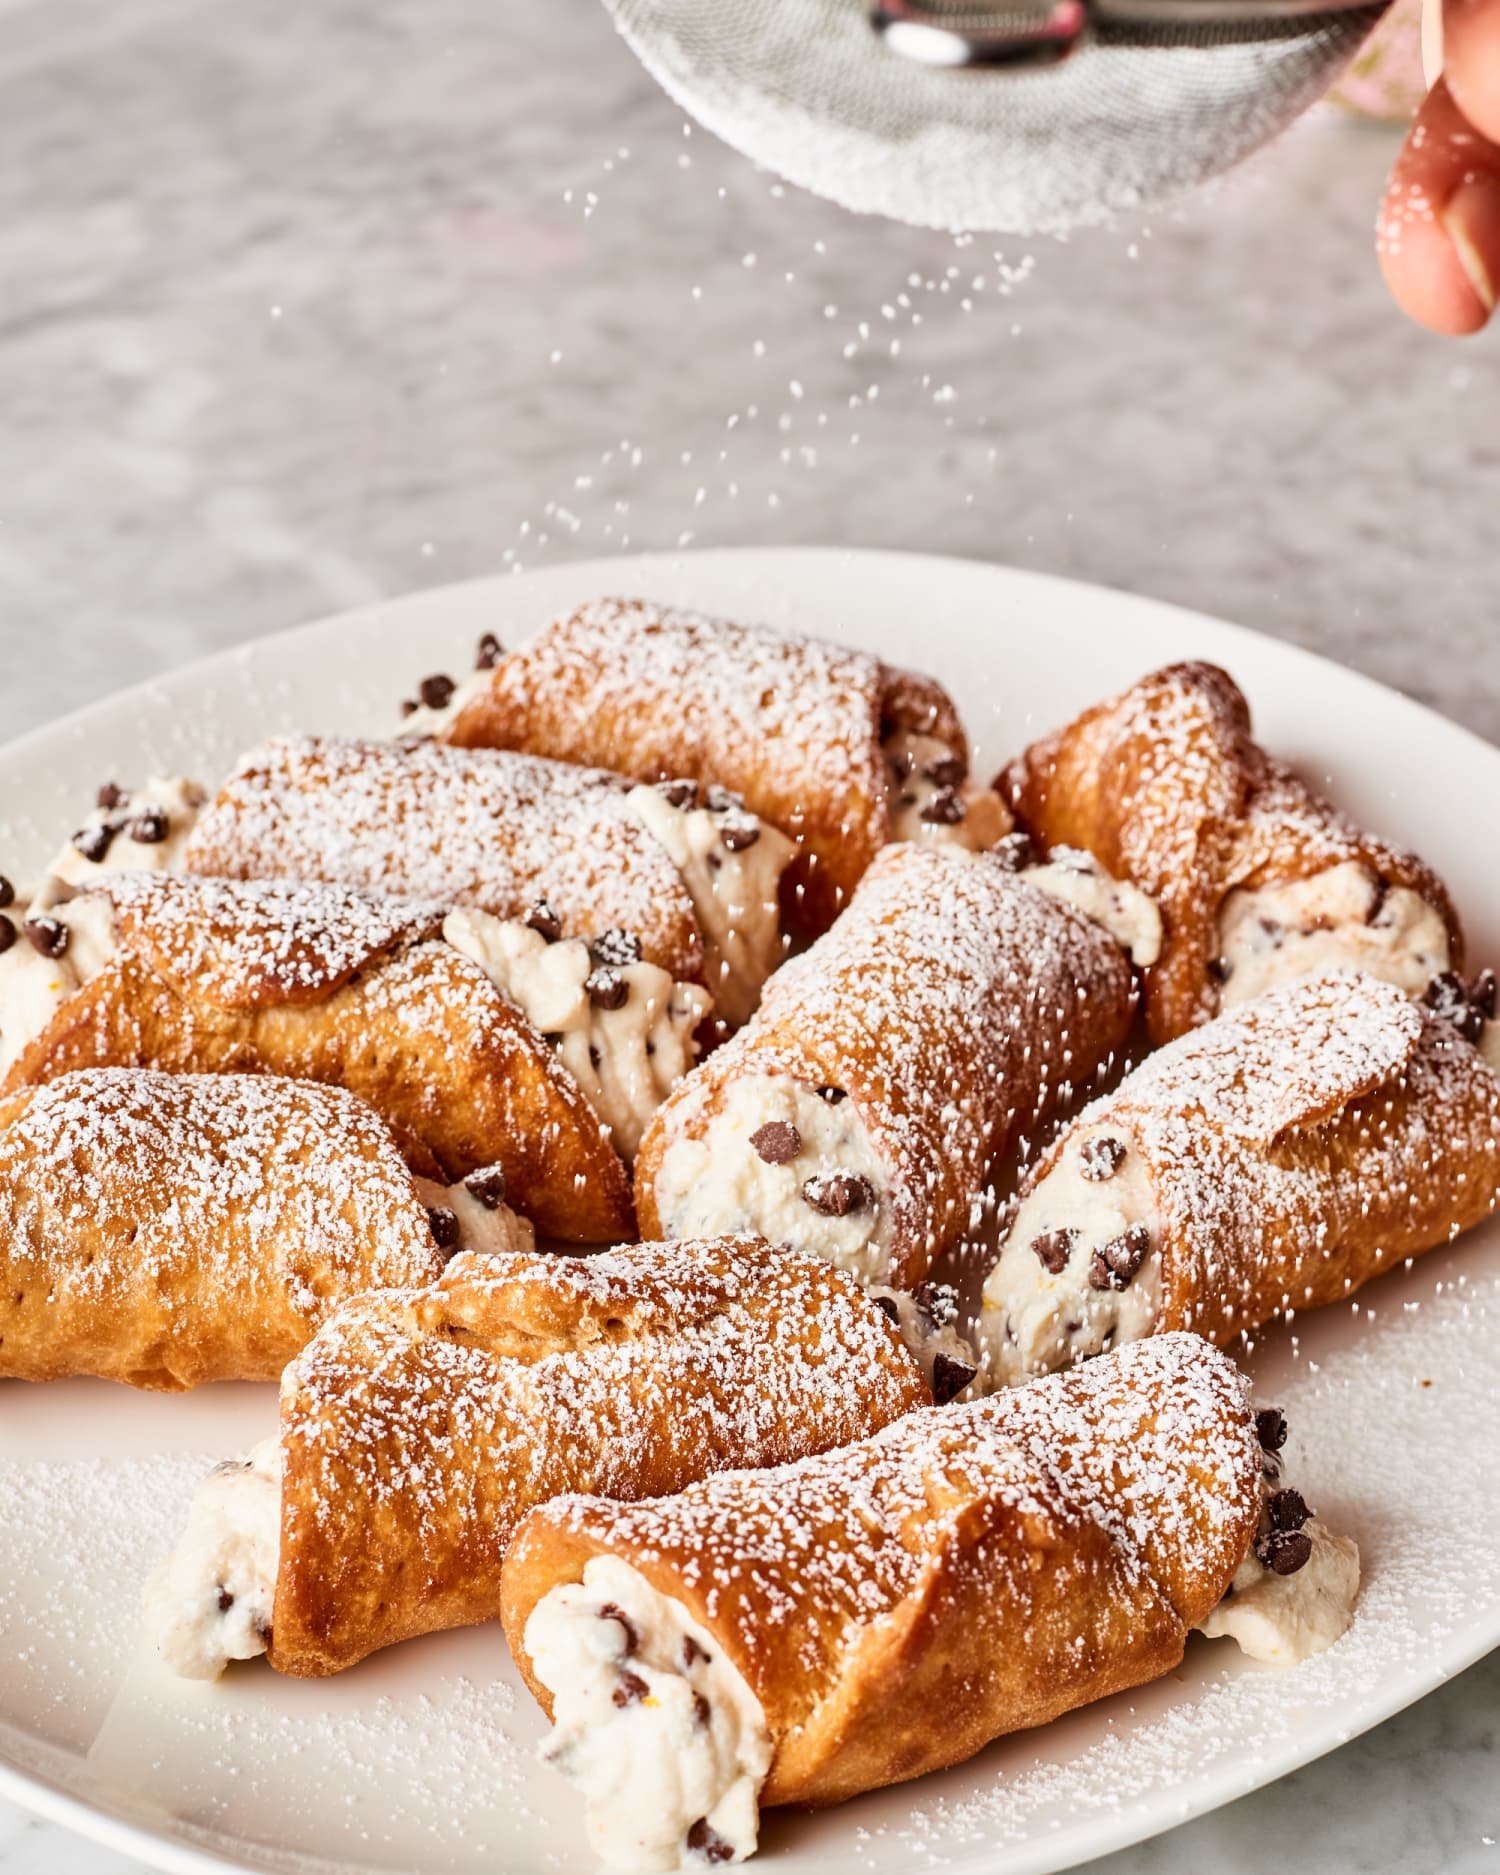 Our Step-by-Step Guide to Making the Best Homemade Cannolis